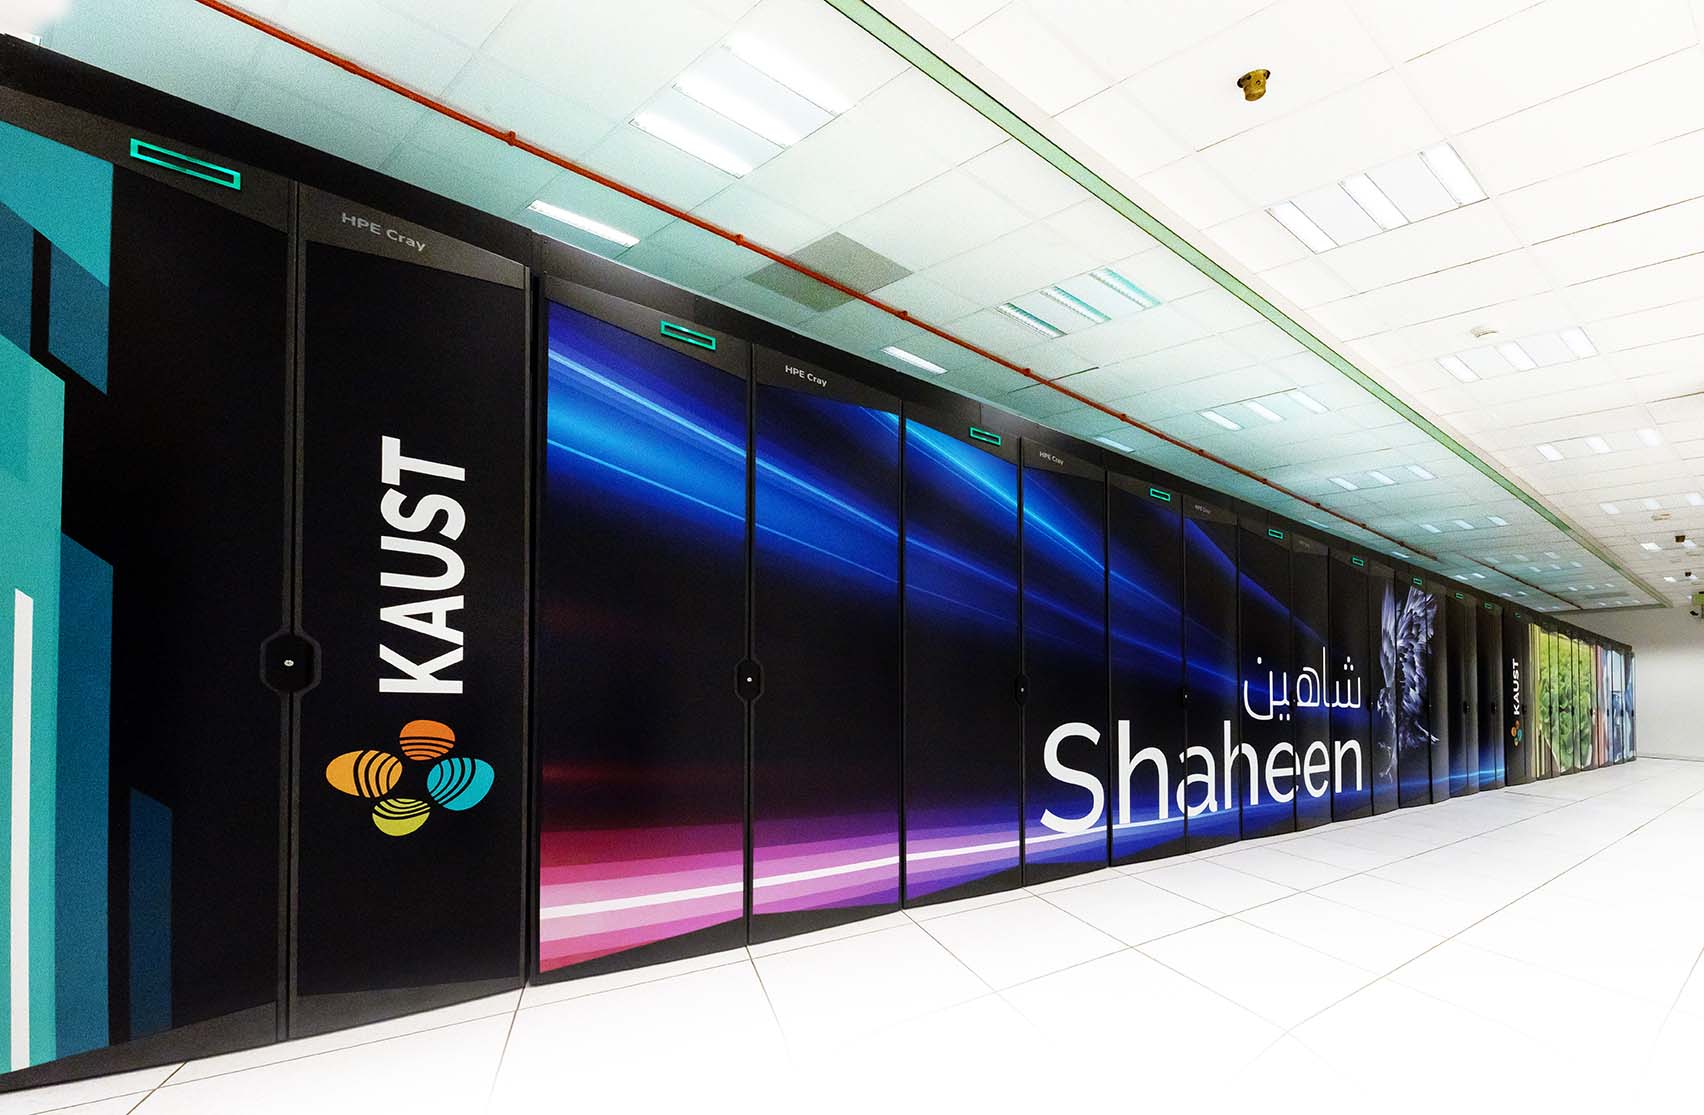 KAUST’s Shaheen III confirmed as the Middle East’s most powerful supercomputer